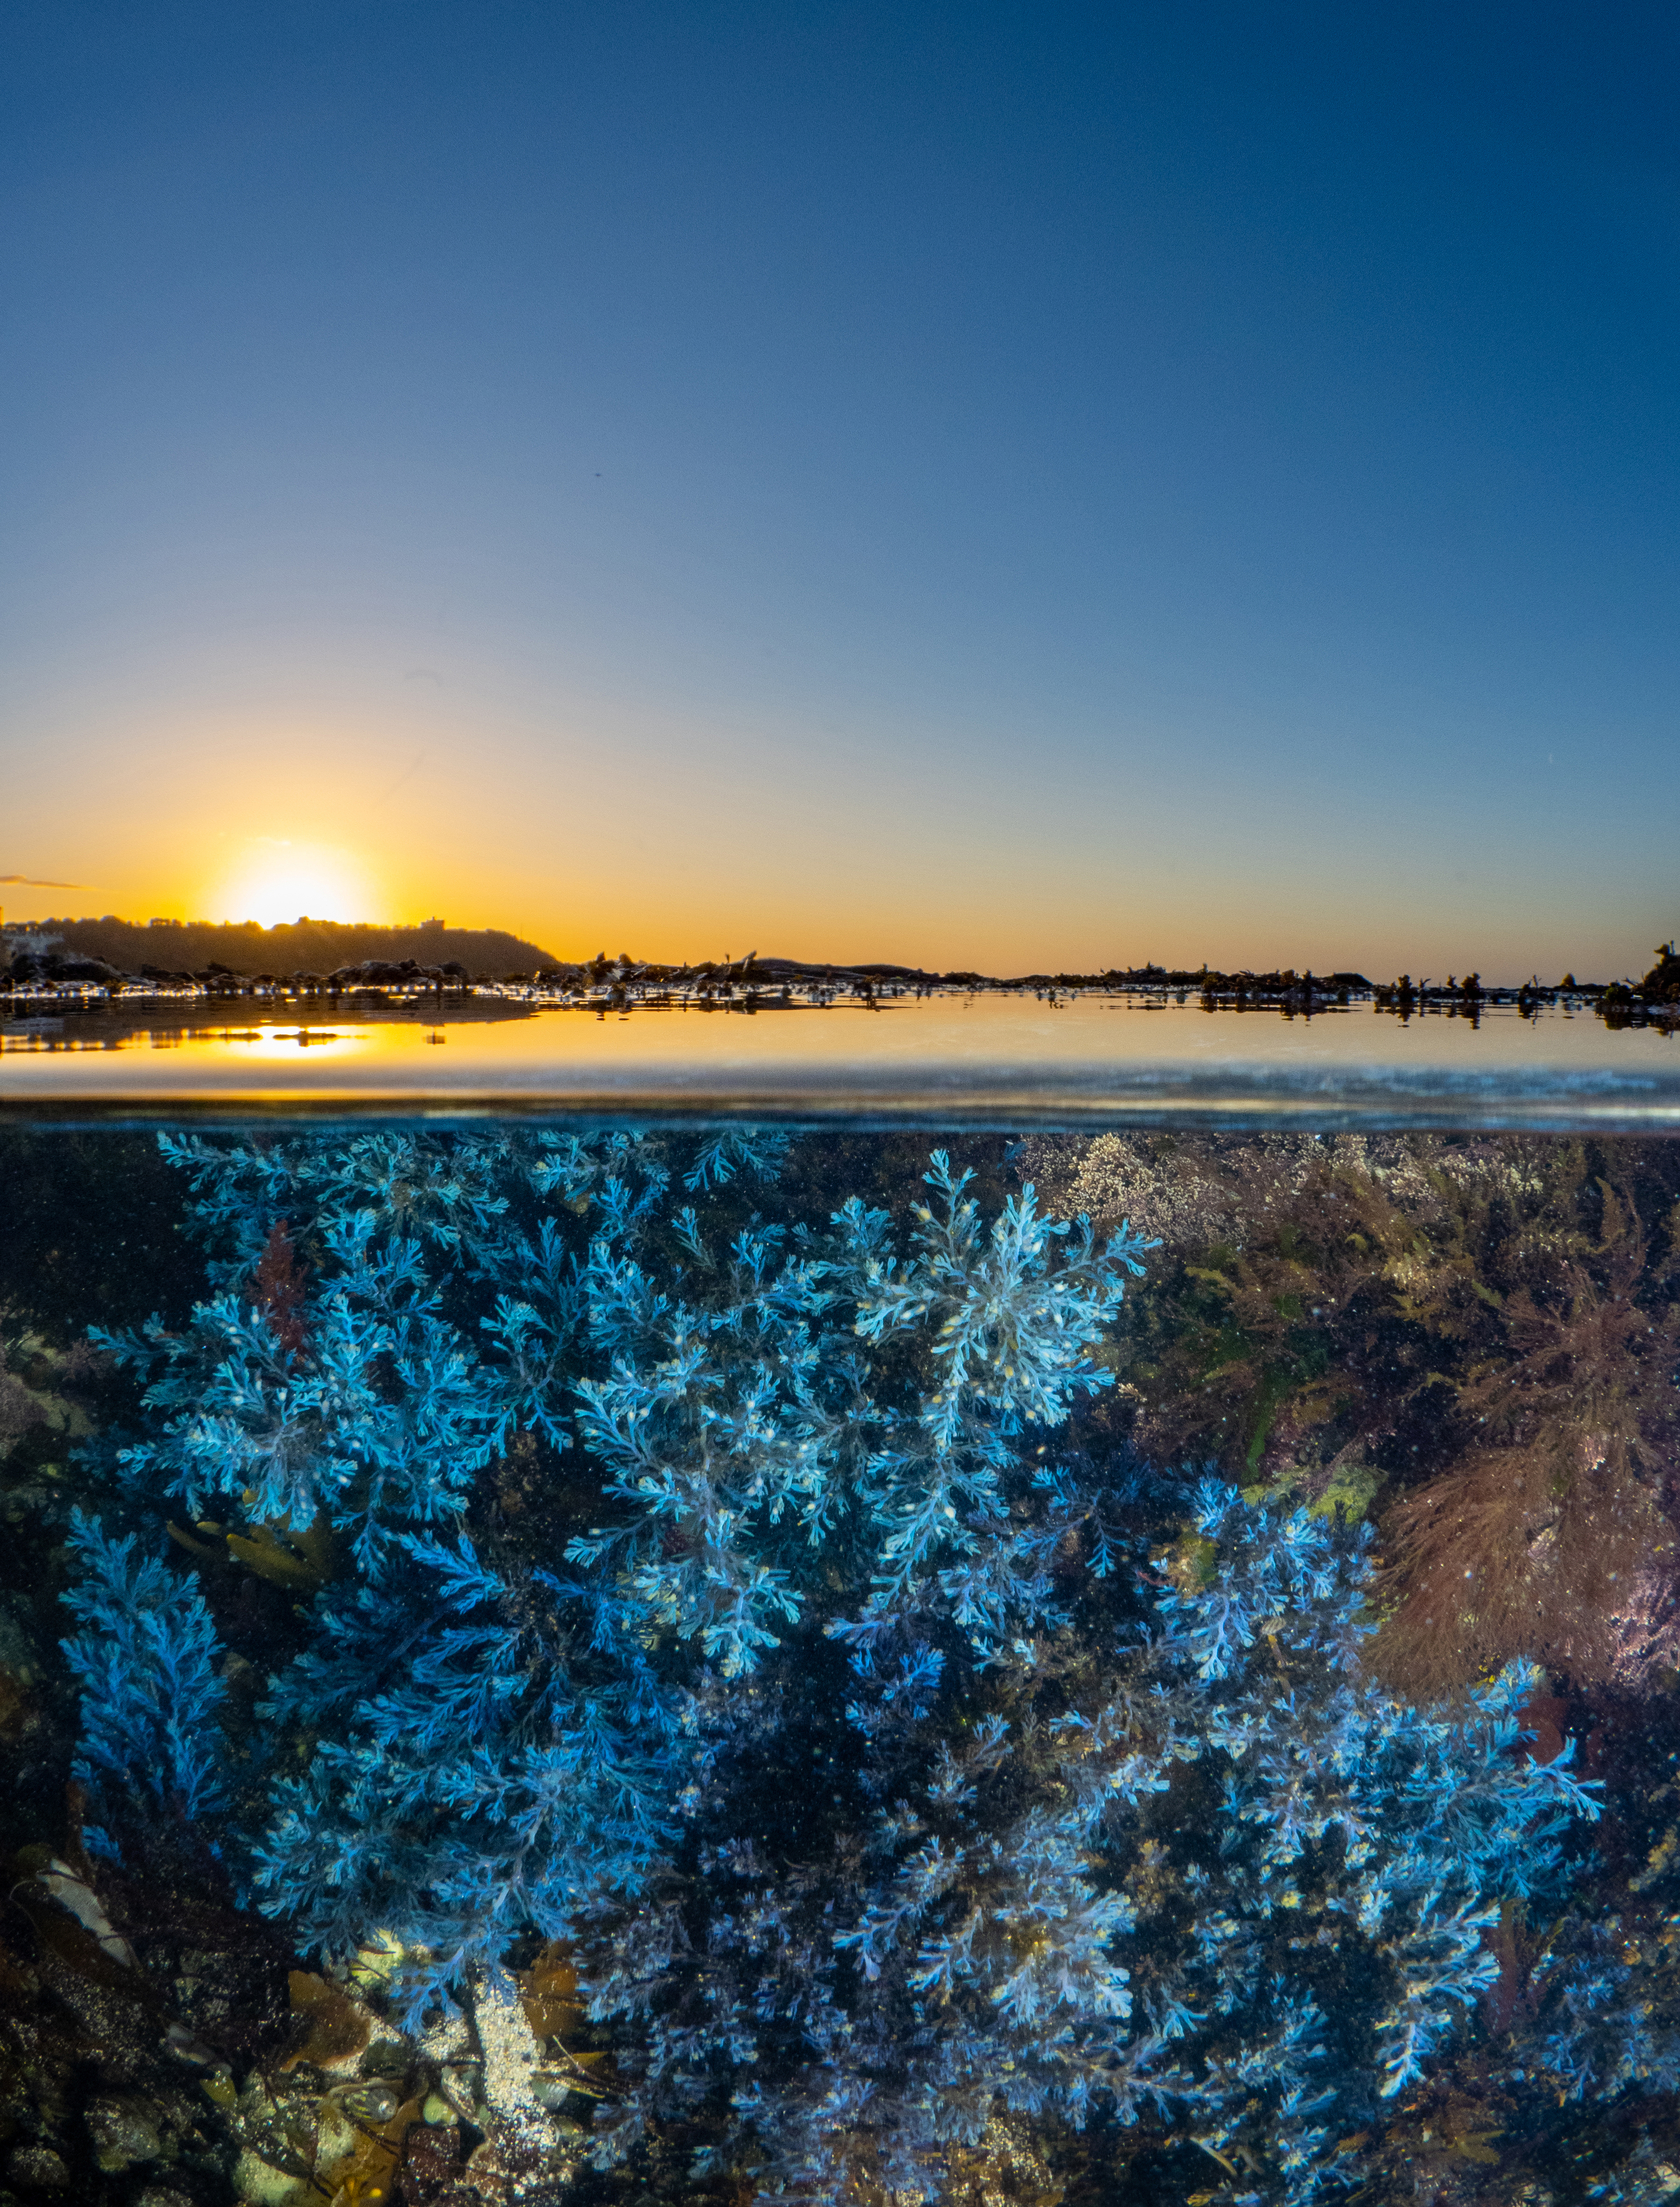 A photo of seagrass at sunrise